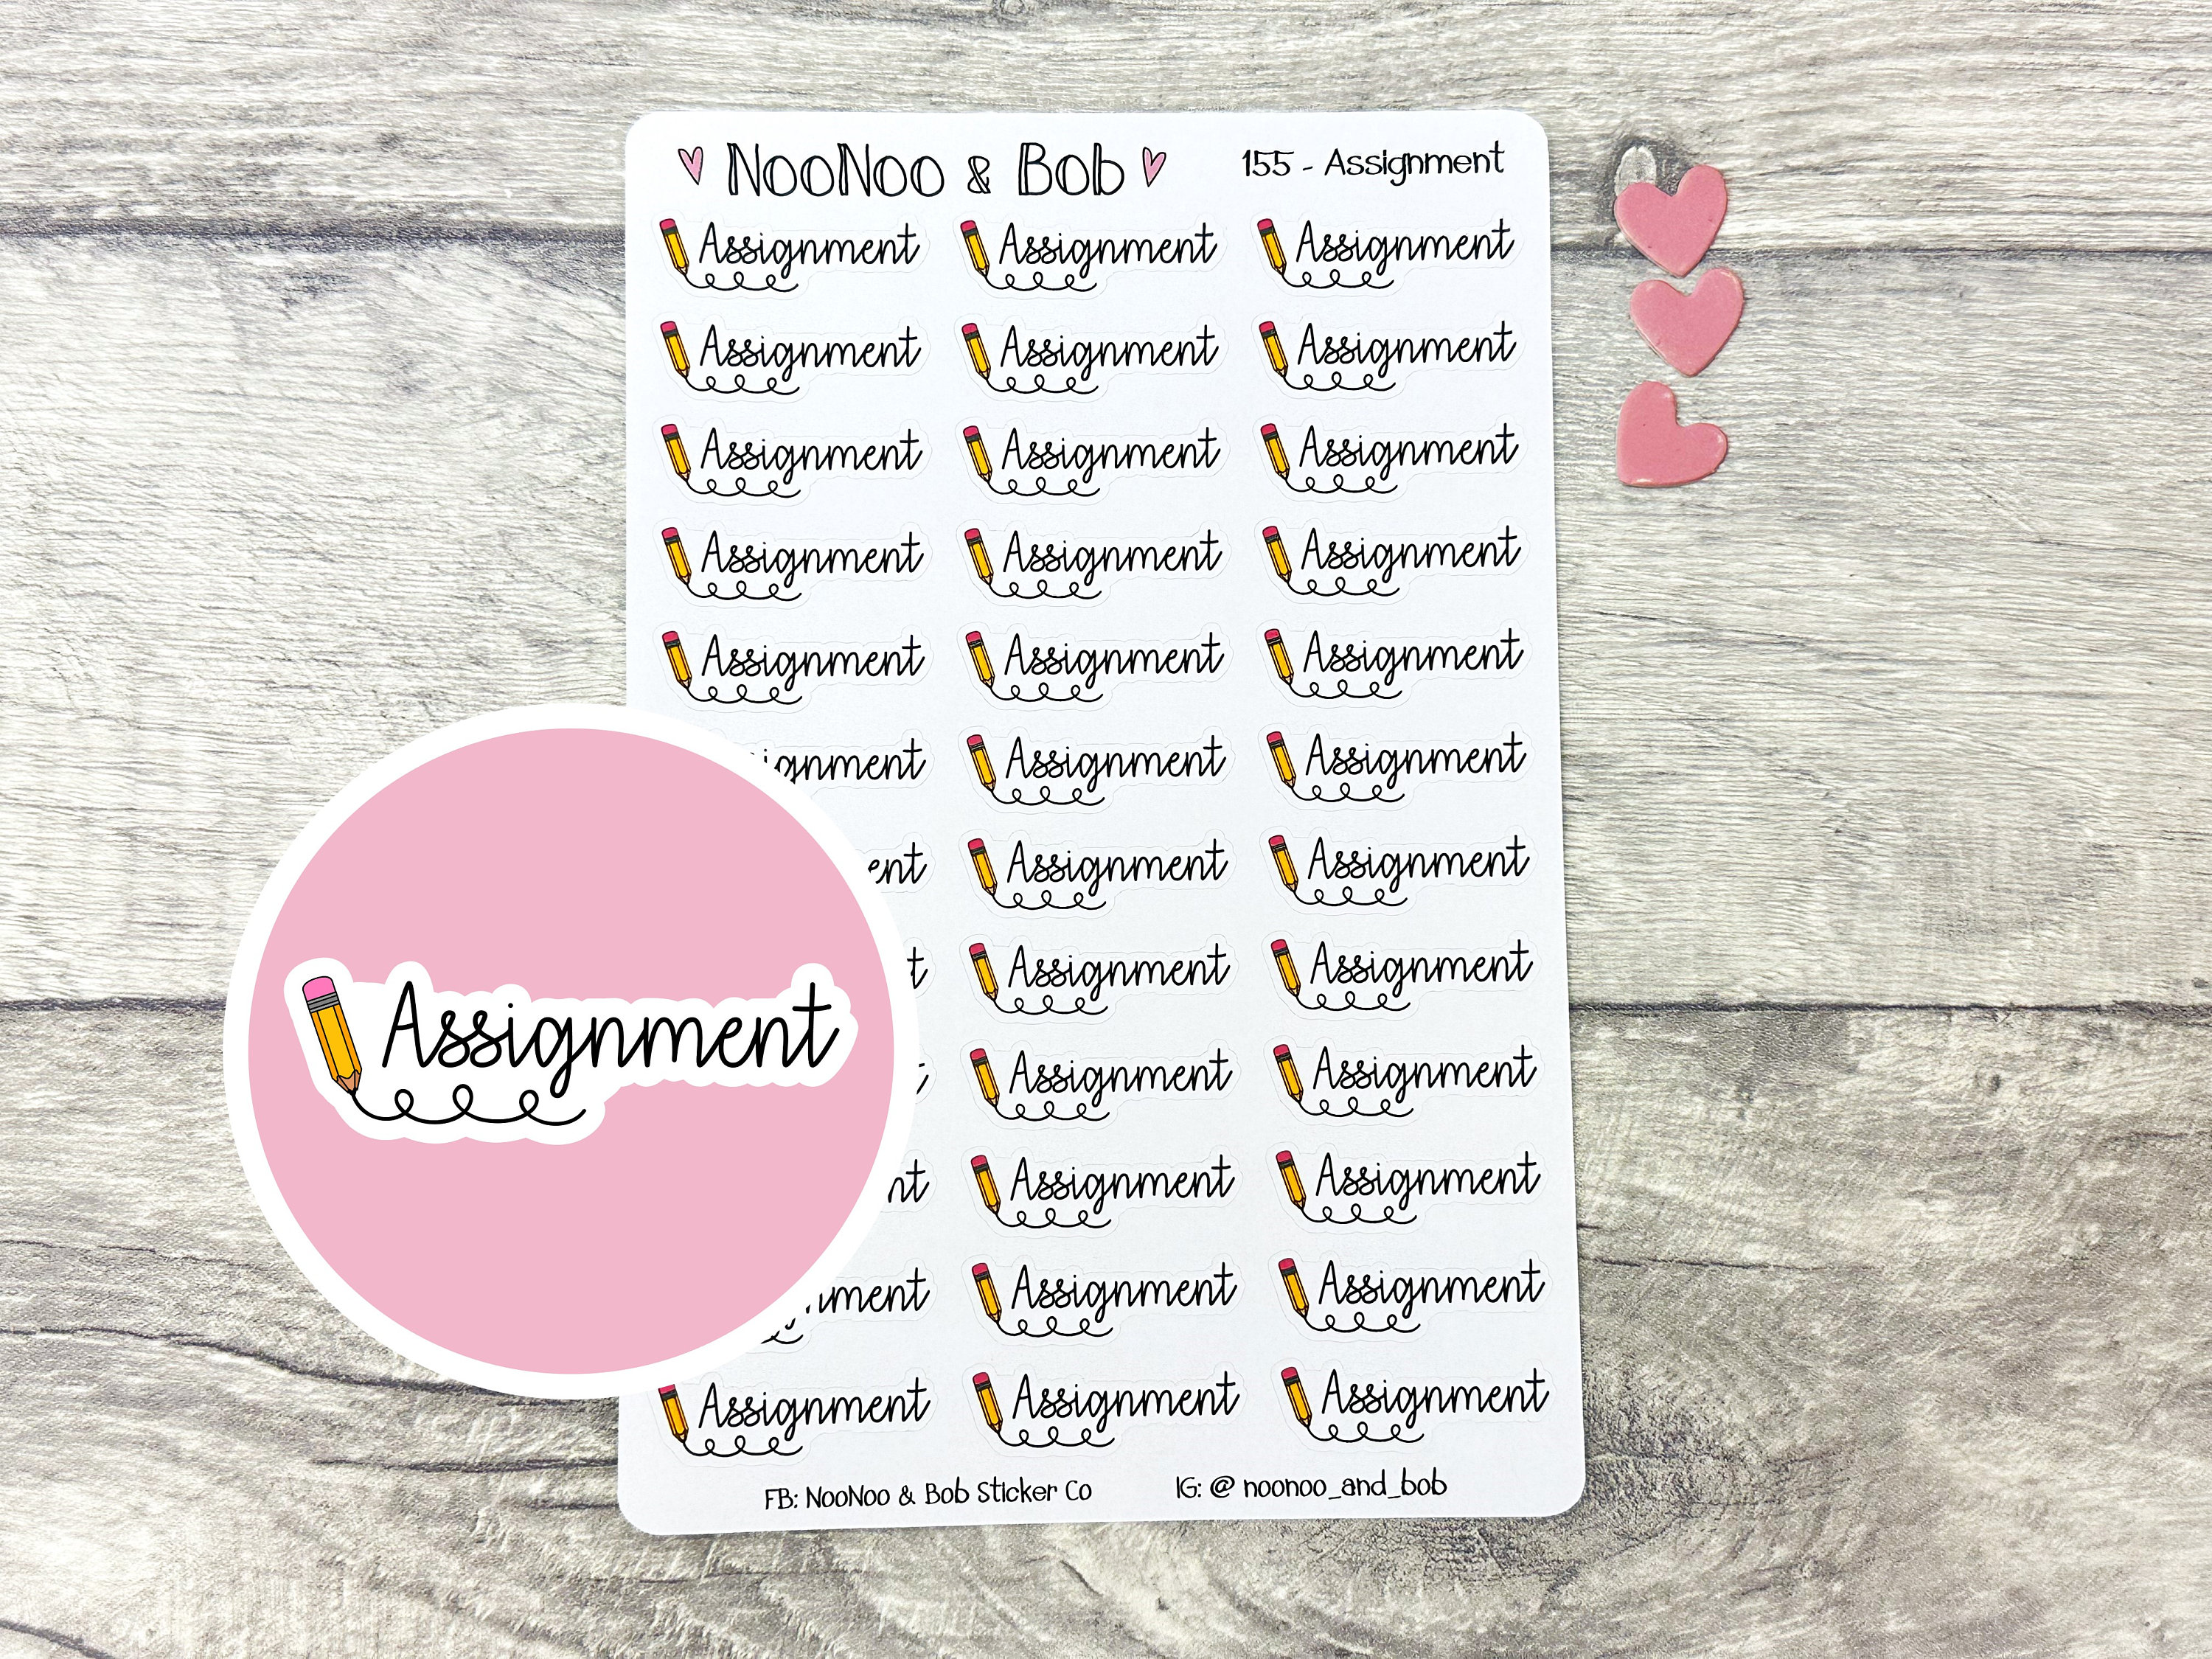 Homework Banner Stickers for Planners & Journals: Pastel Study Tasks to Do  Daily Weekly Monthly Work School Teacher Mom Hobo HDR3 